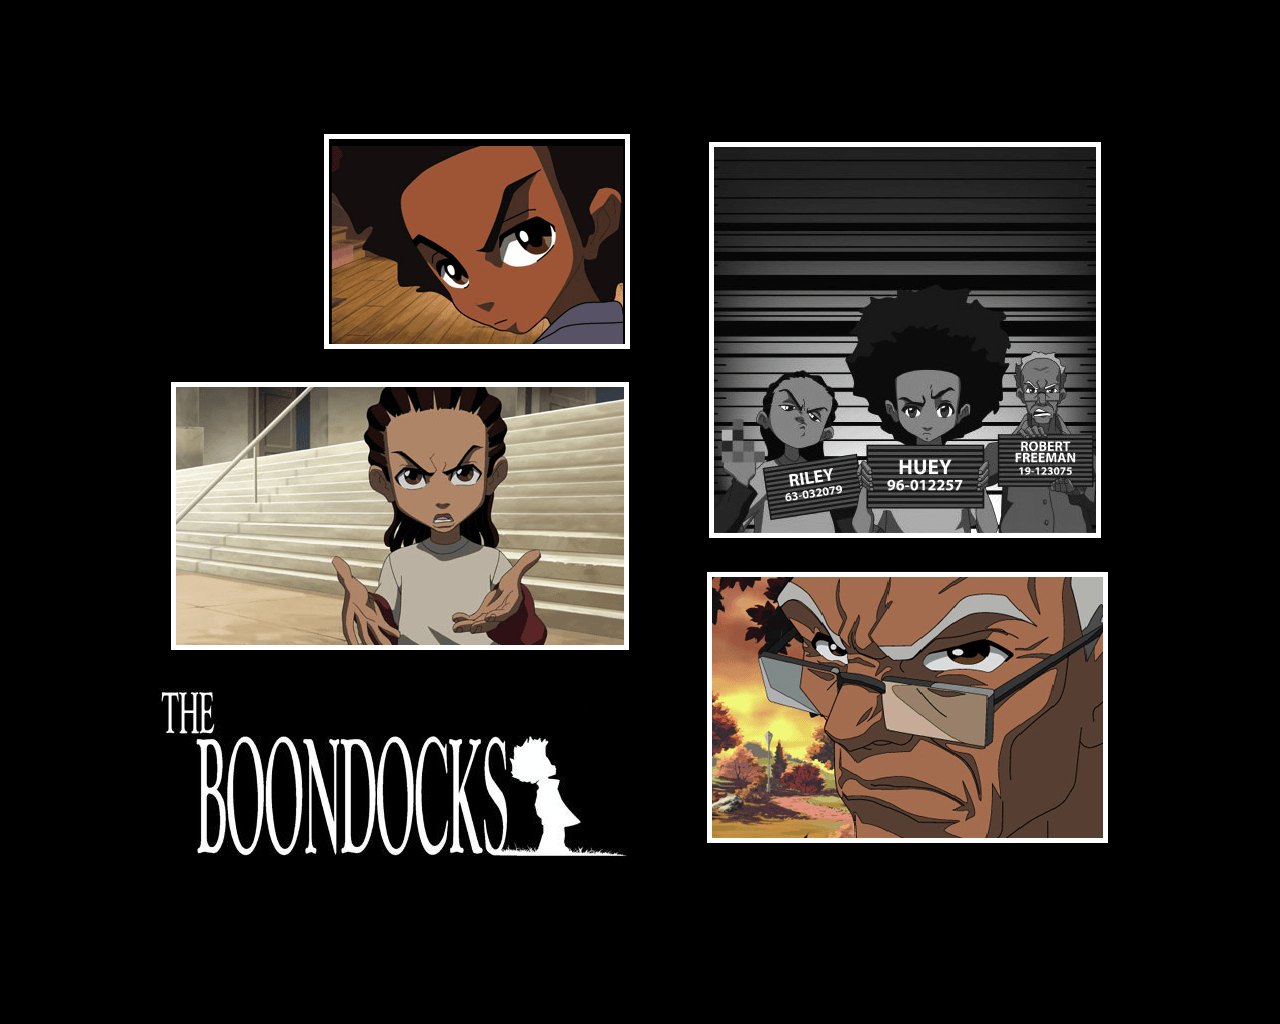 The Boondocks Wallpaper Huey Comment For Myspace Twitter Facebook